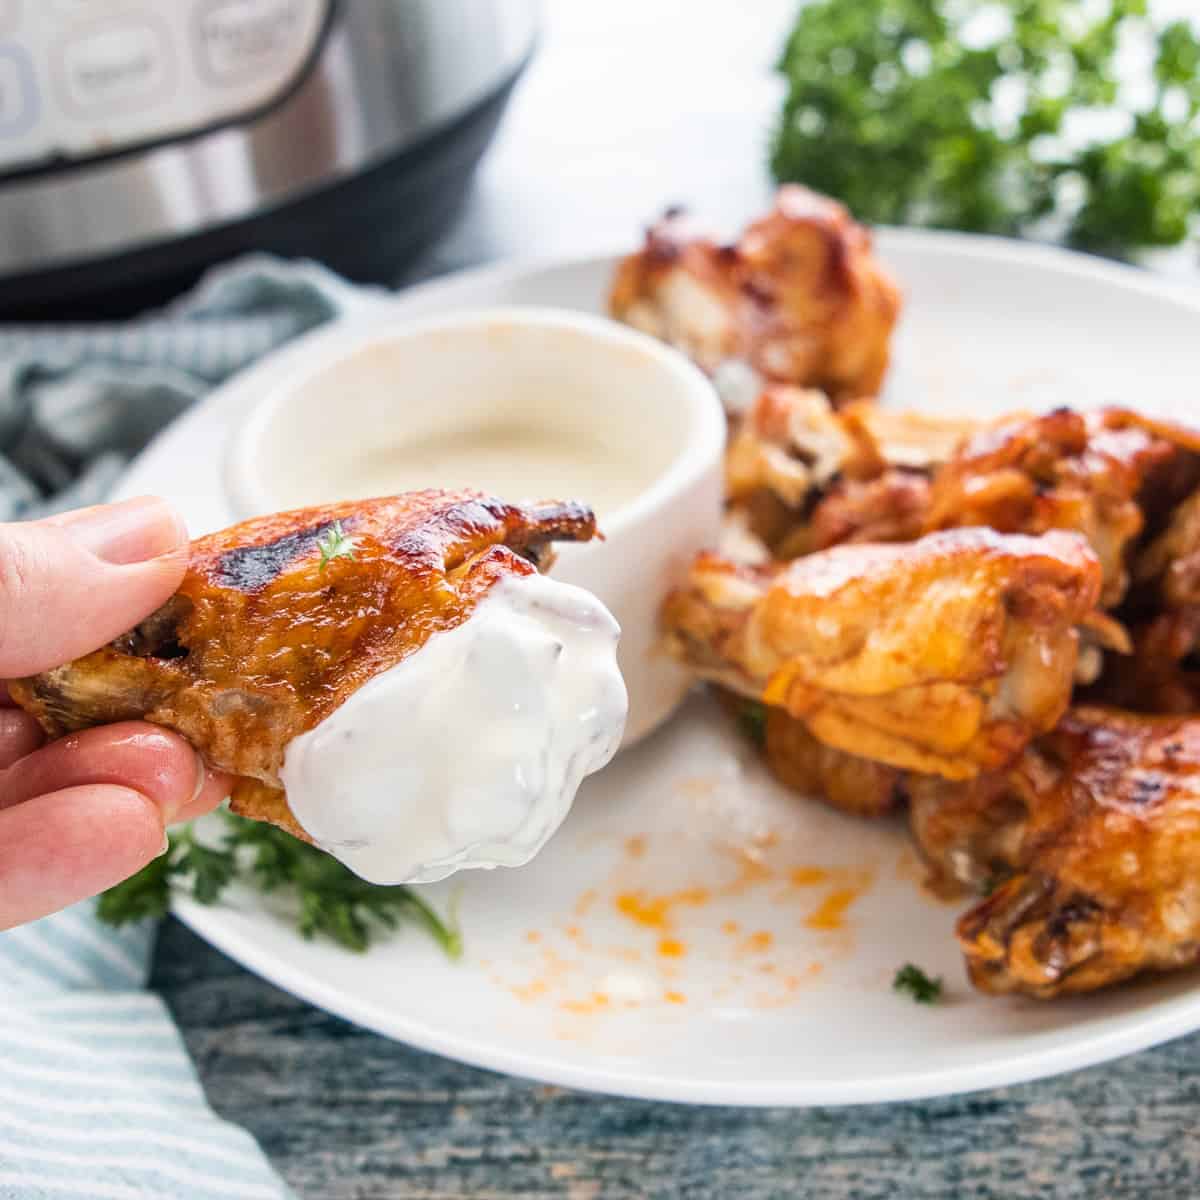 Chicken Wings on a plate with dipping sauce on the side of the plate with a hand holding a chicken wing dipped in sauce.